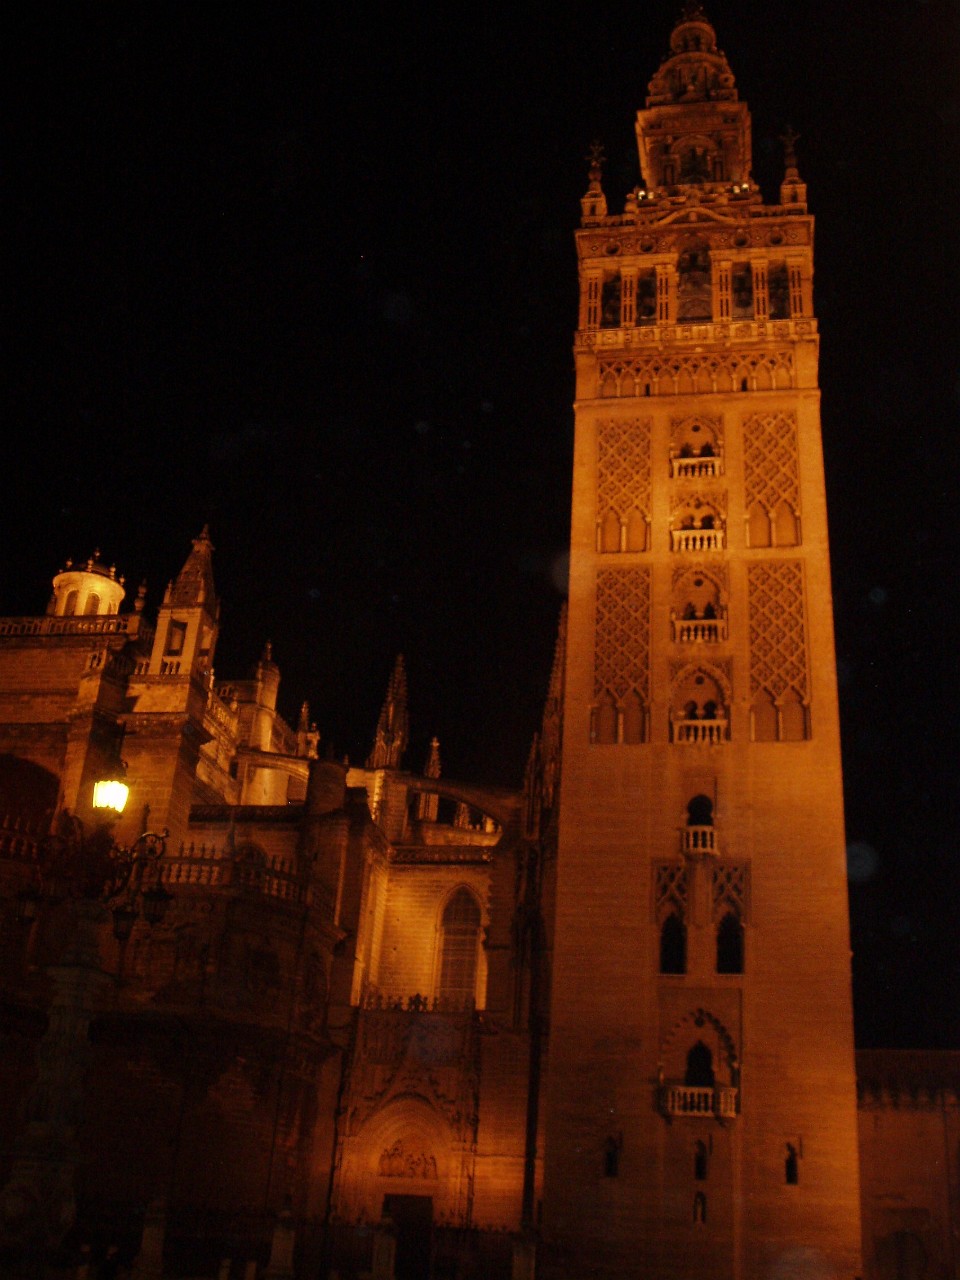 The Giralda (Cathedral Tower) in Seville